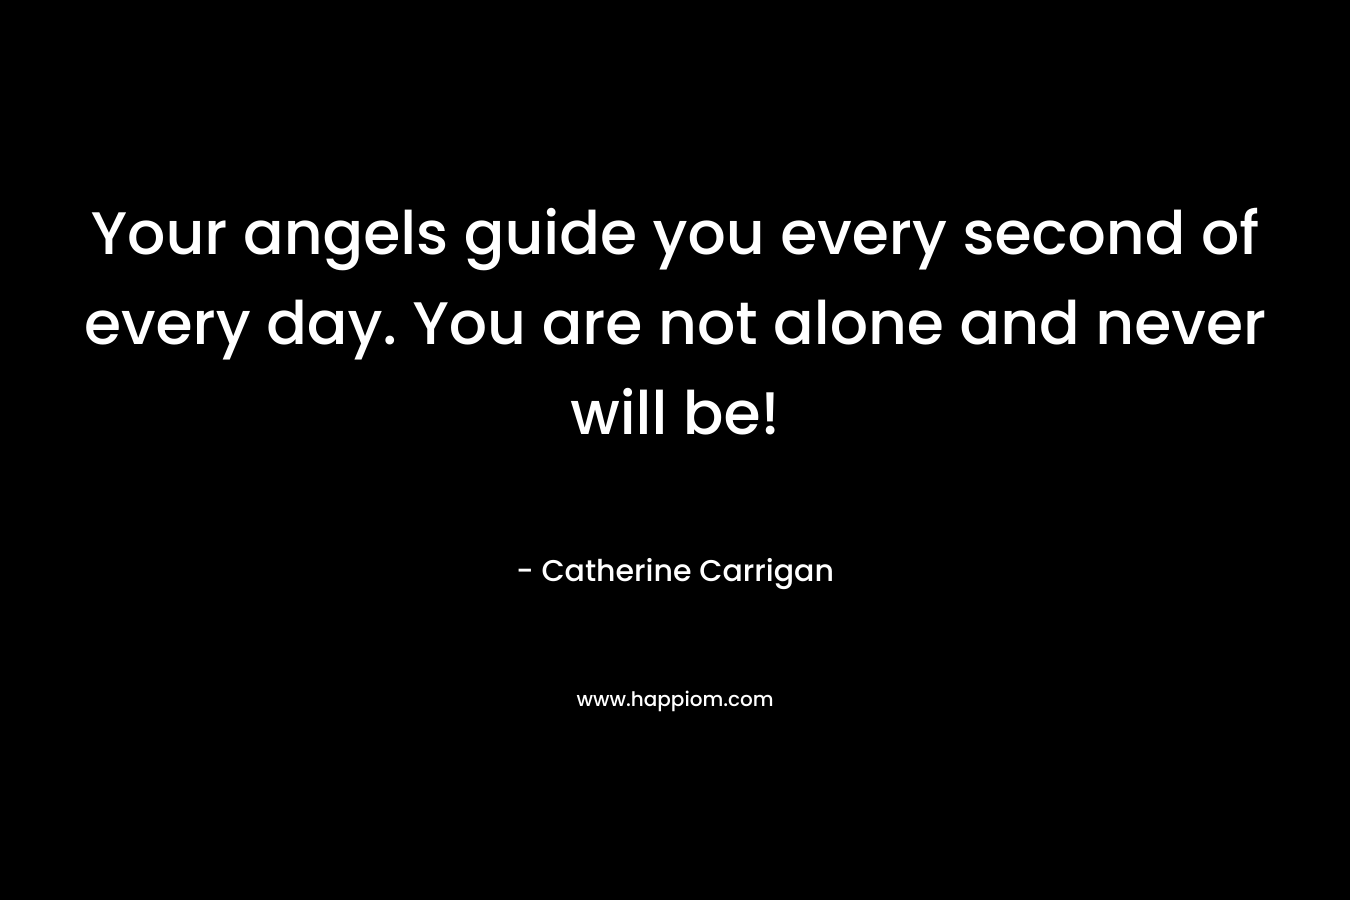 Your angels guide you every second of every day. You are not alone and never will be! – Catherine Carrigan